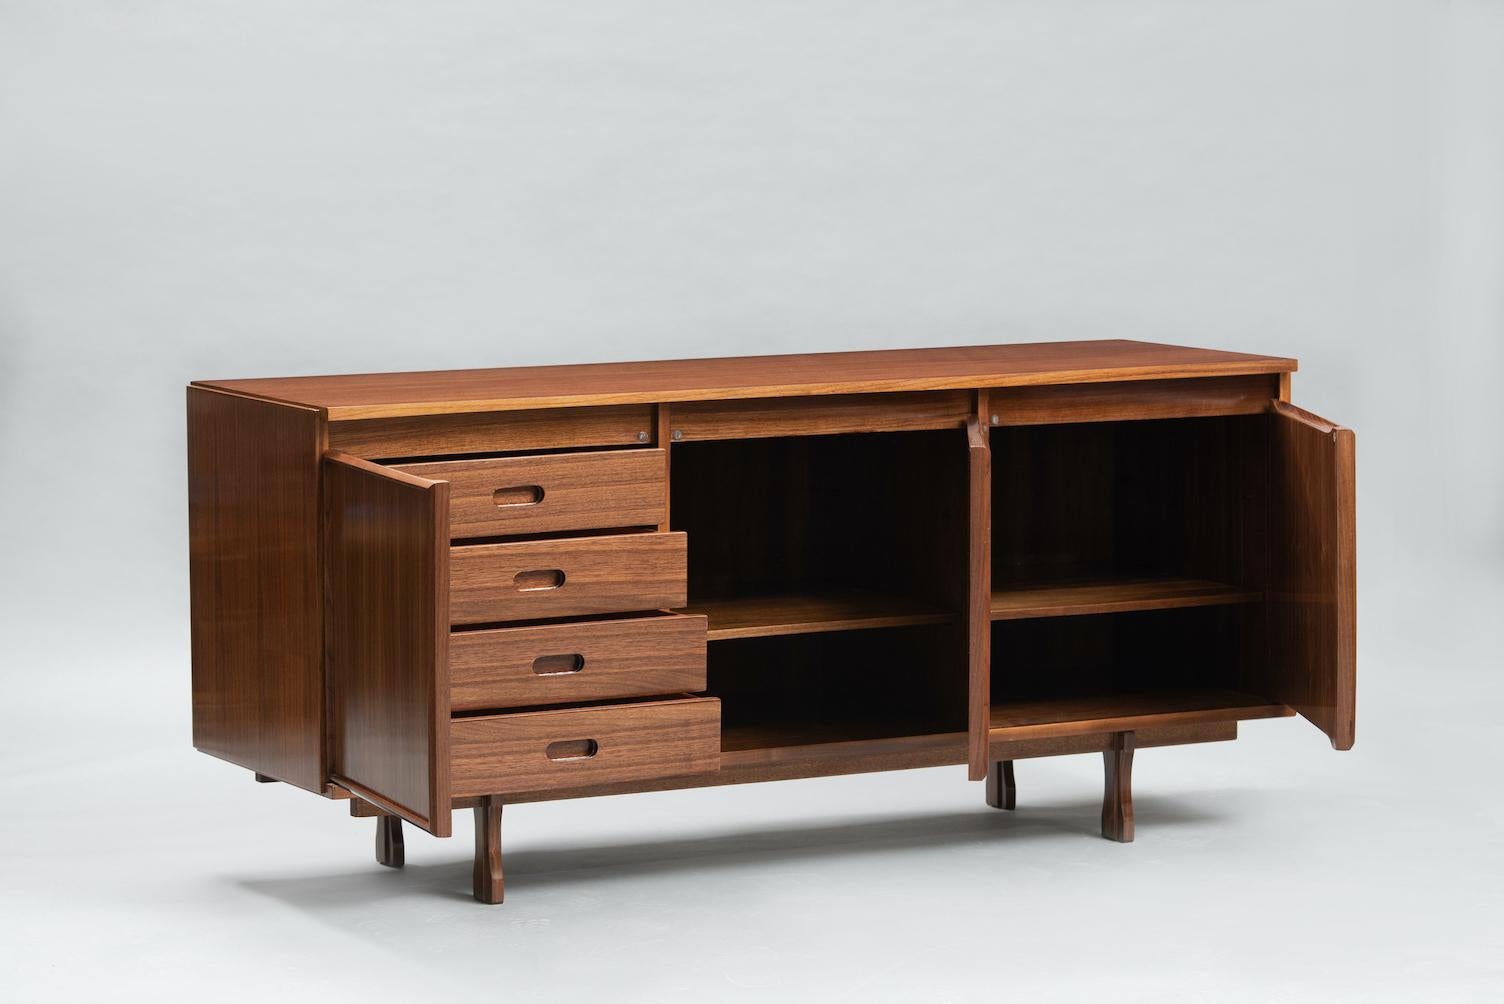 Giovanni Ausenda walnut sideboard for Stilwood, this item is finished on the back so it can be used as room divider.
Bibliography: Abitare 58 (Ottobre 1967), publicità.